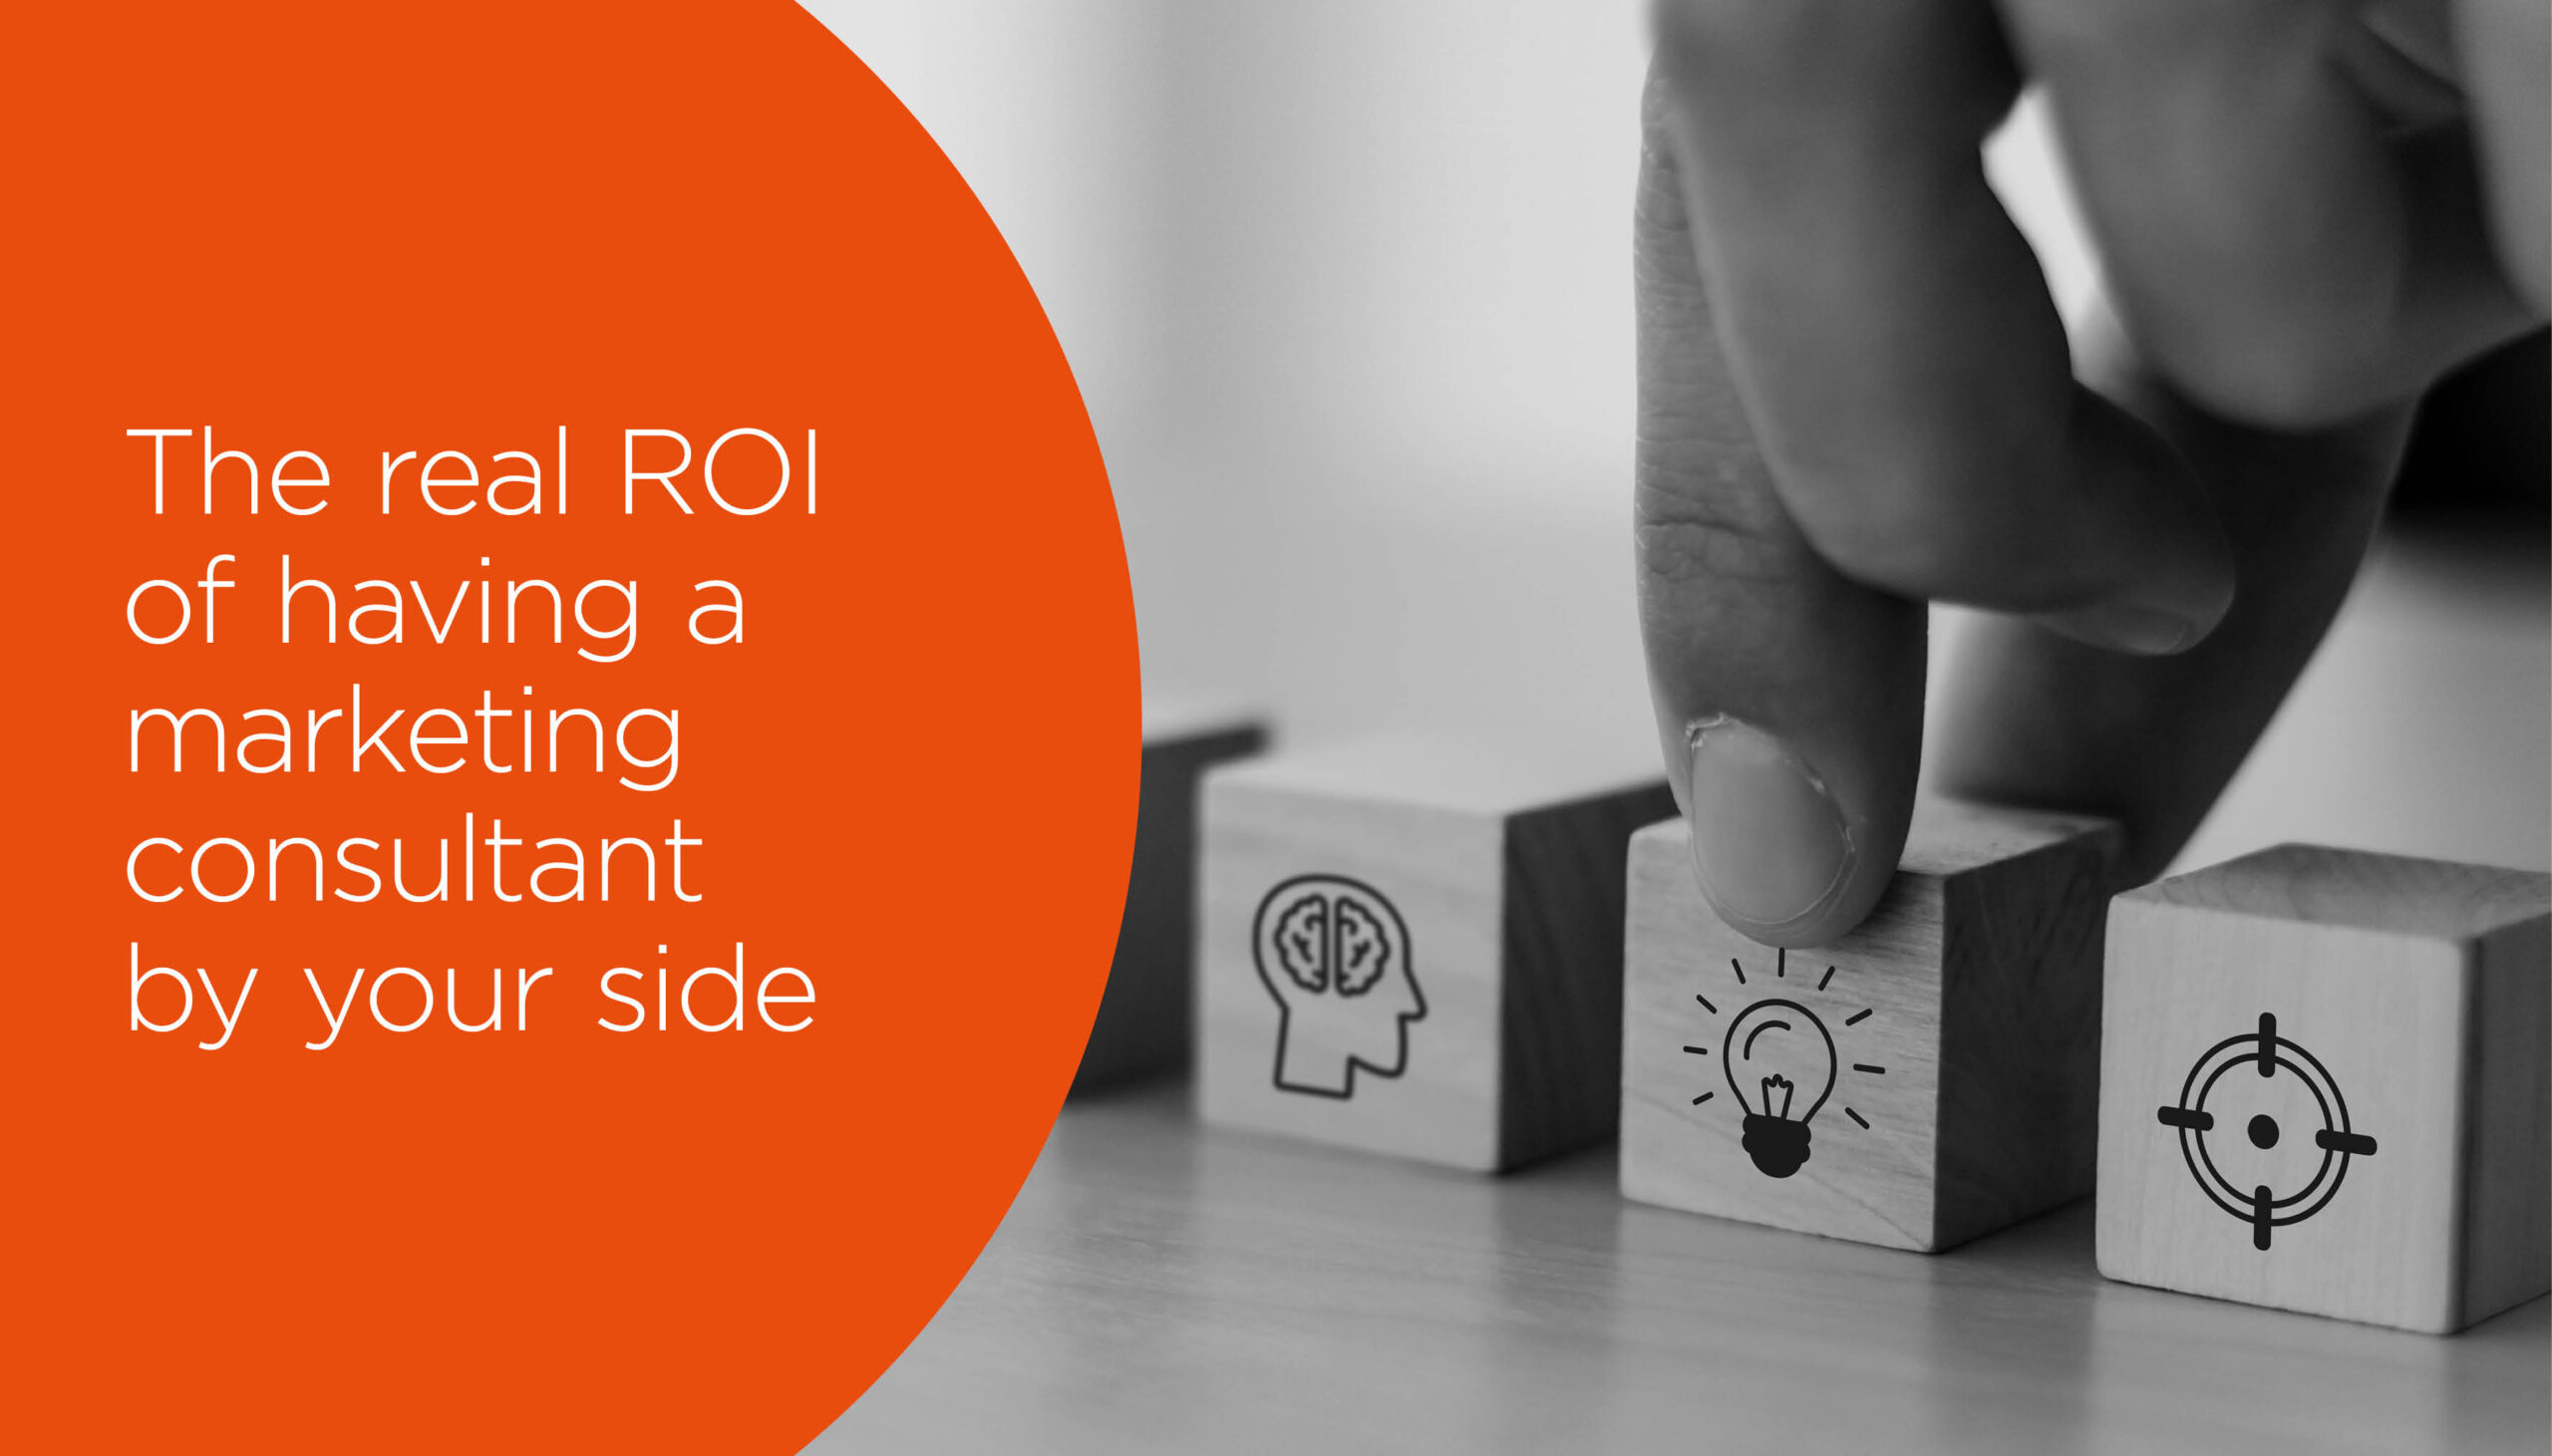 The real ROI of having a Marketing Consultant by your side